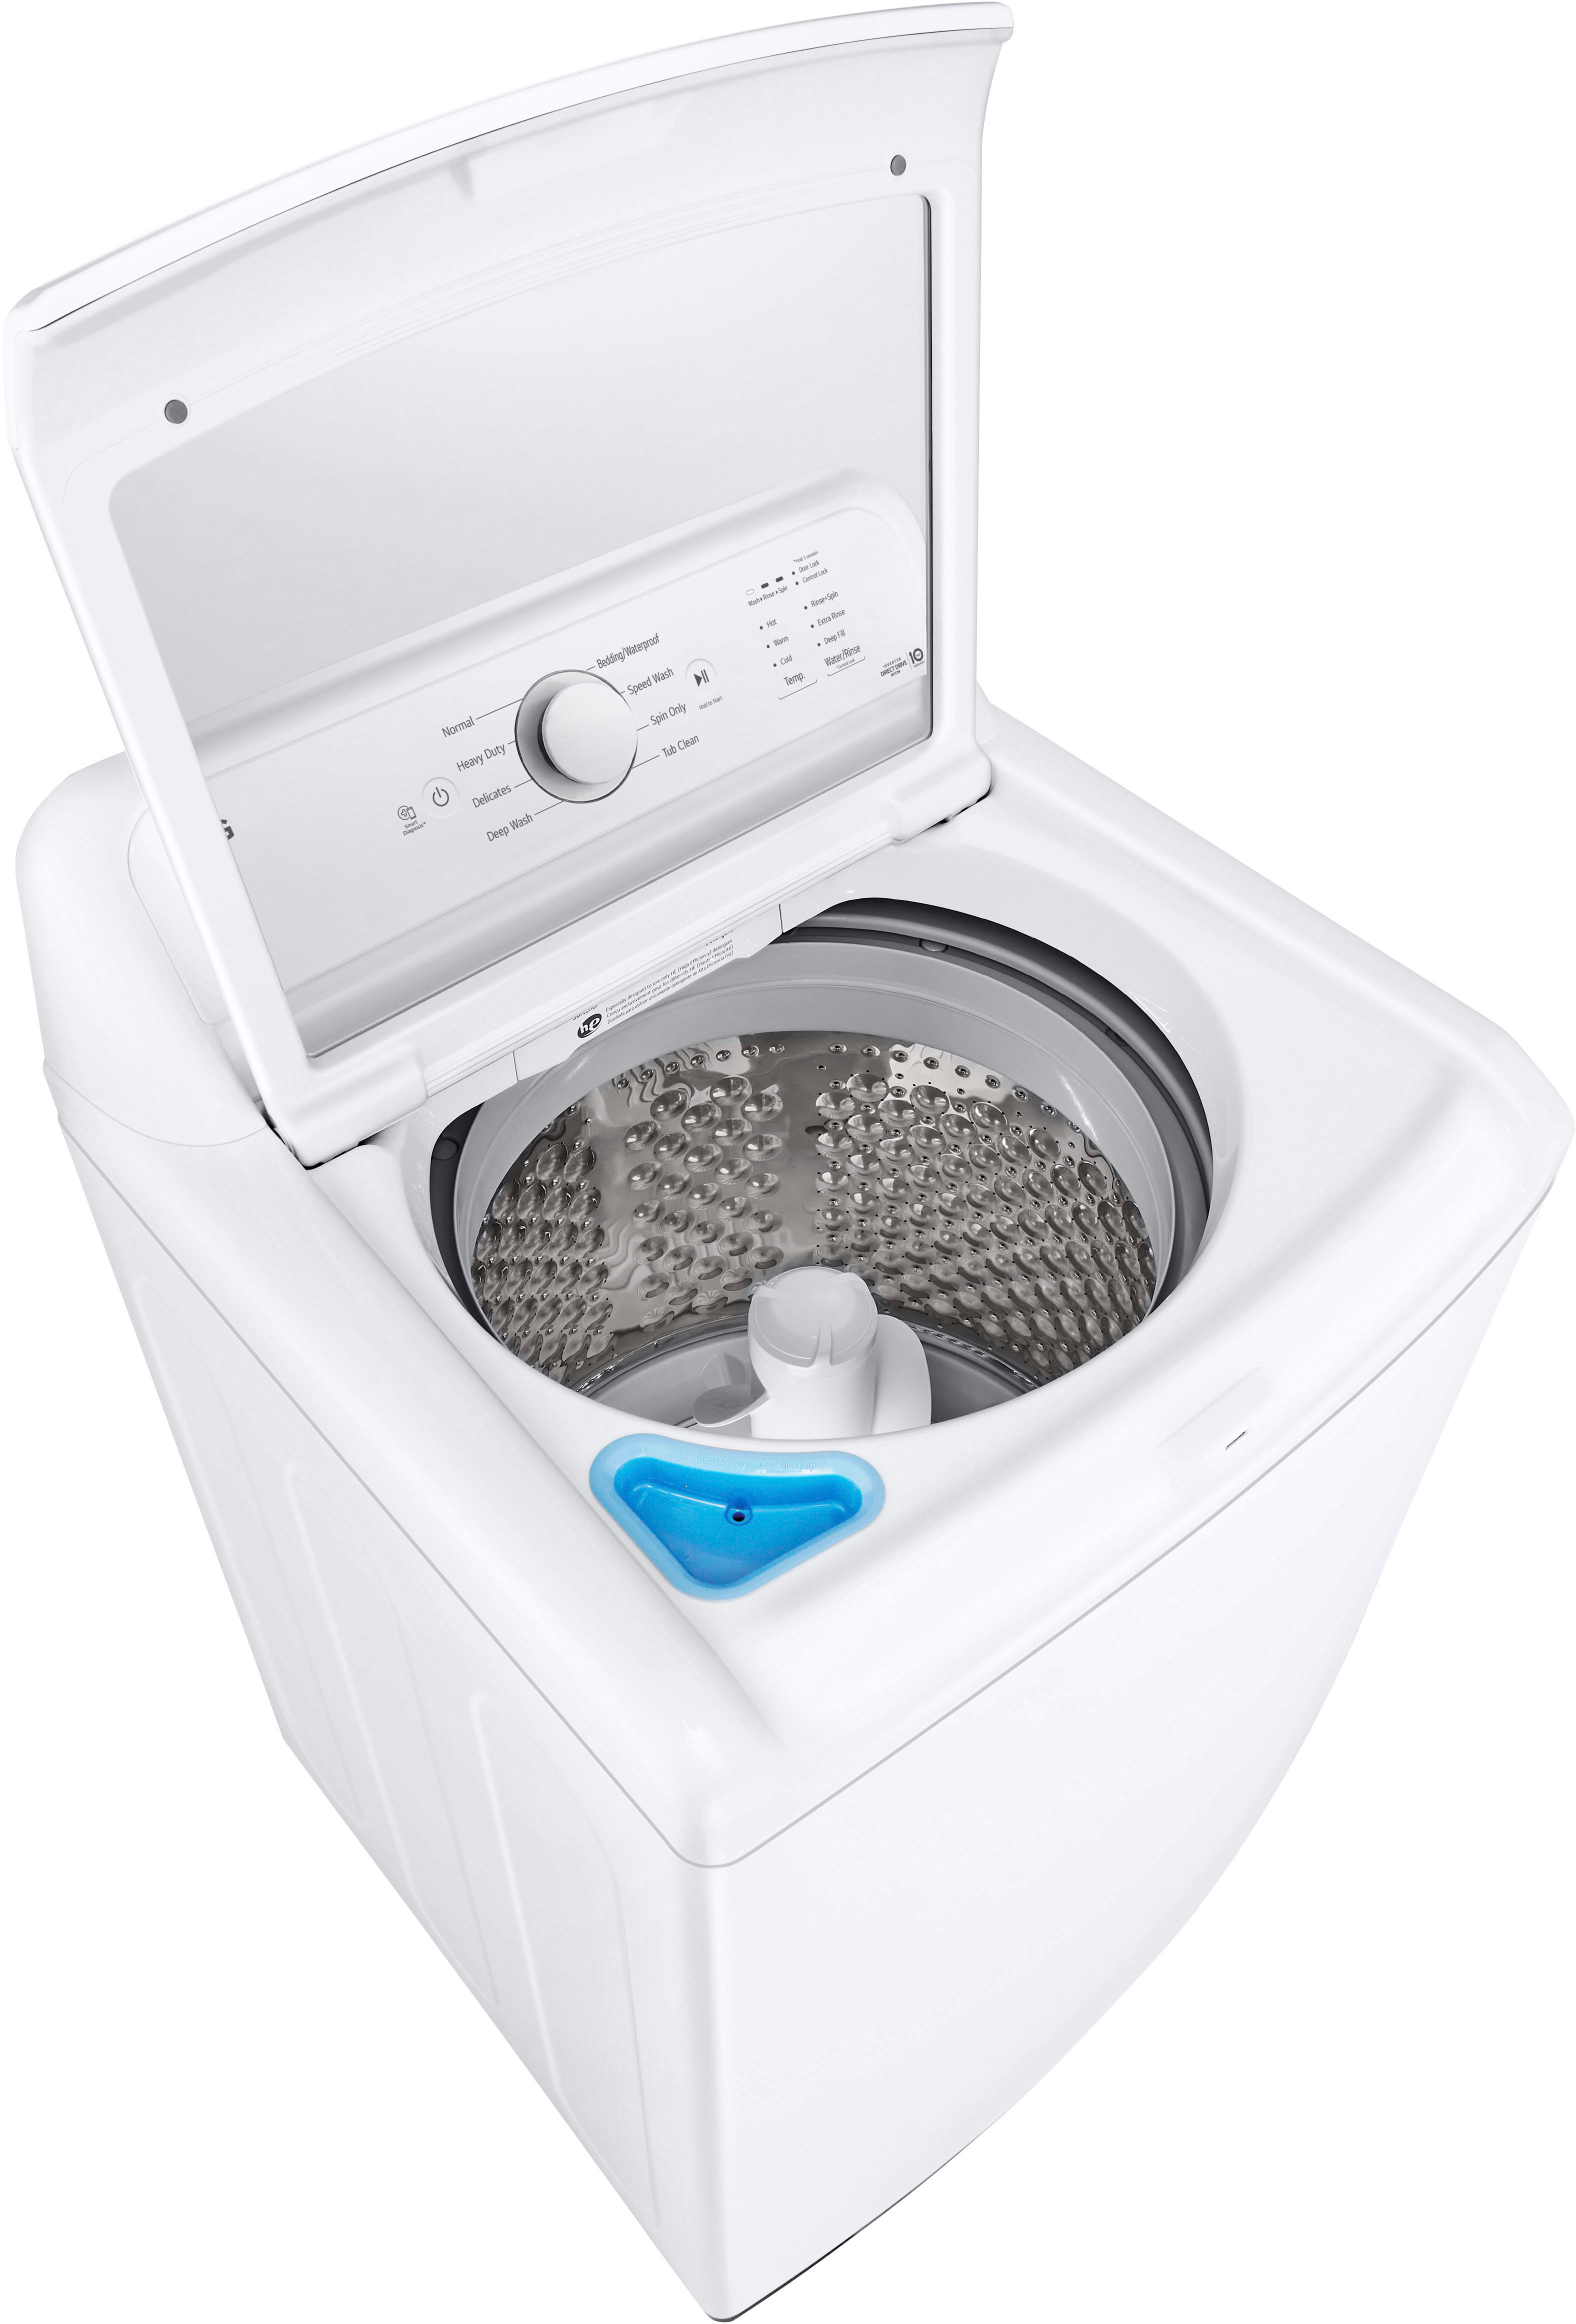 Cu. Buy SlamProof Ft. Load White with LG Lid Top WT6105CW Washer Glass - Best 4.1